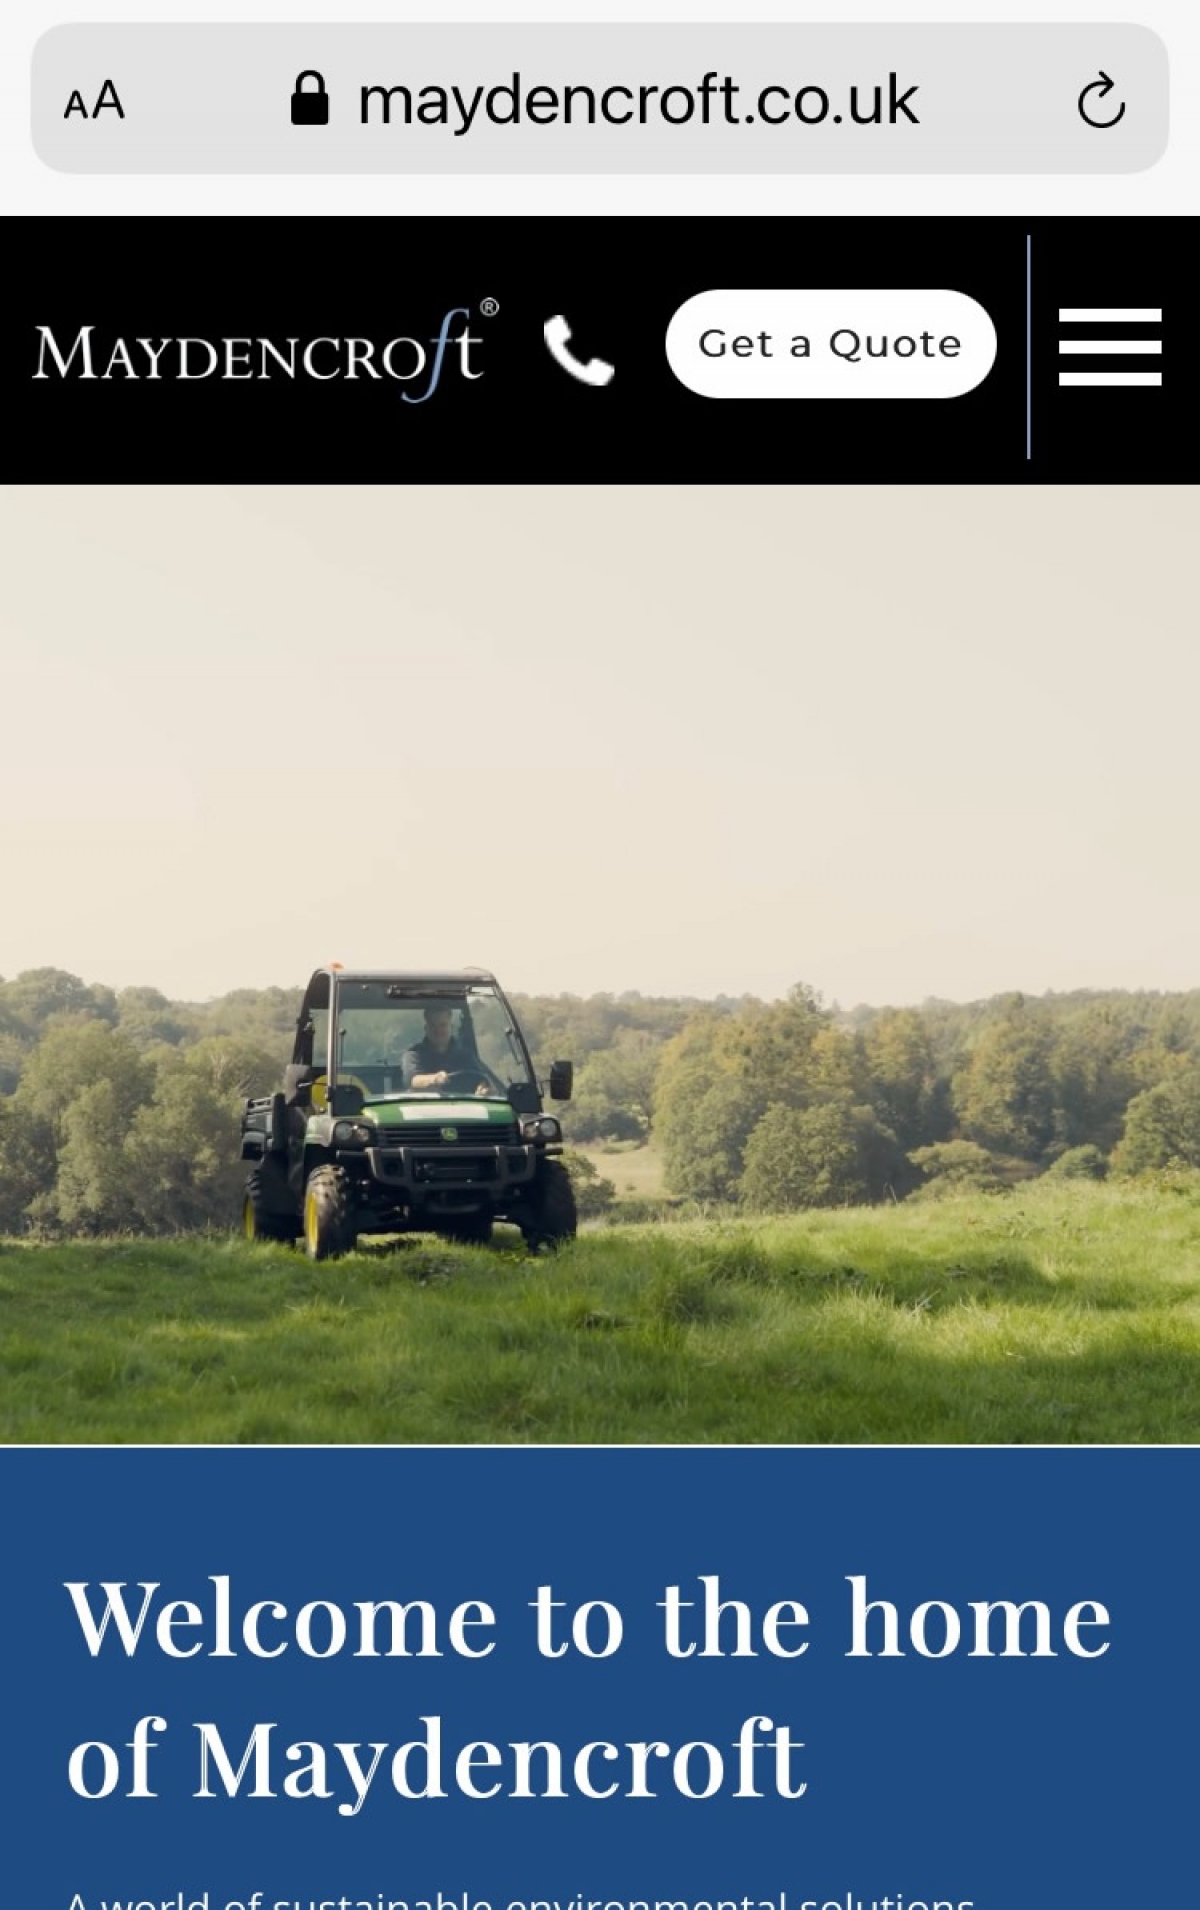 Maydencroft - Updated for 2021 Brand new multi media website and portal